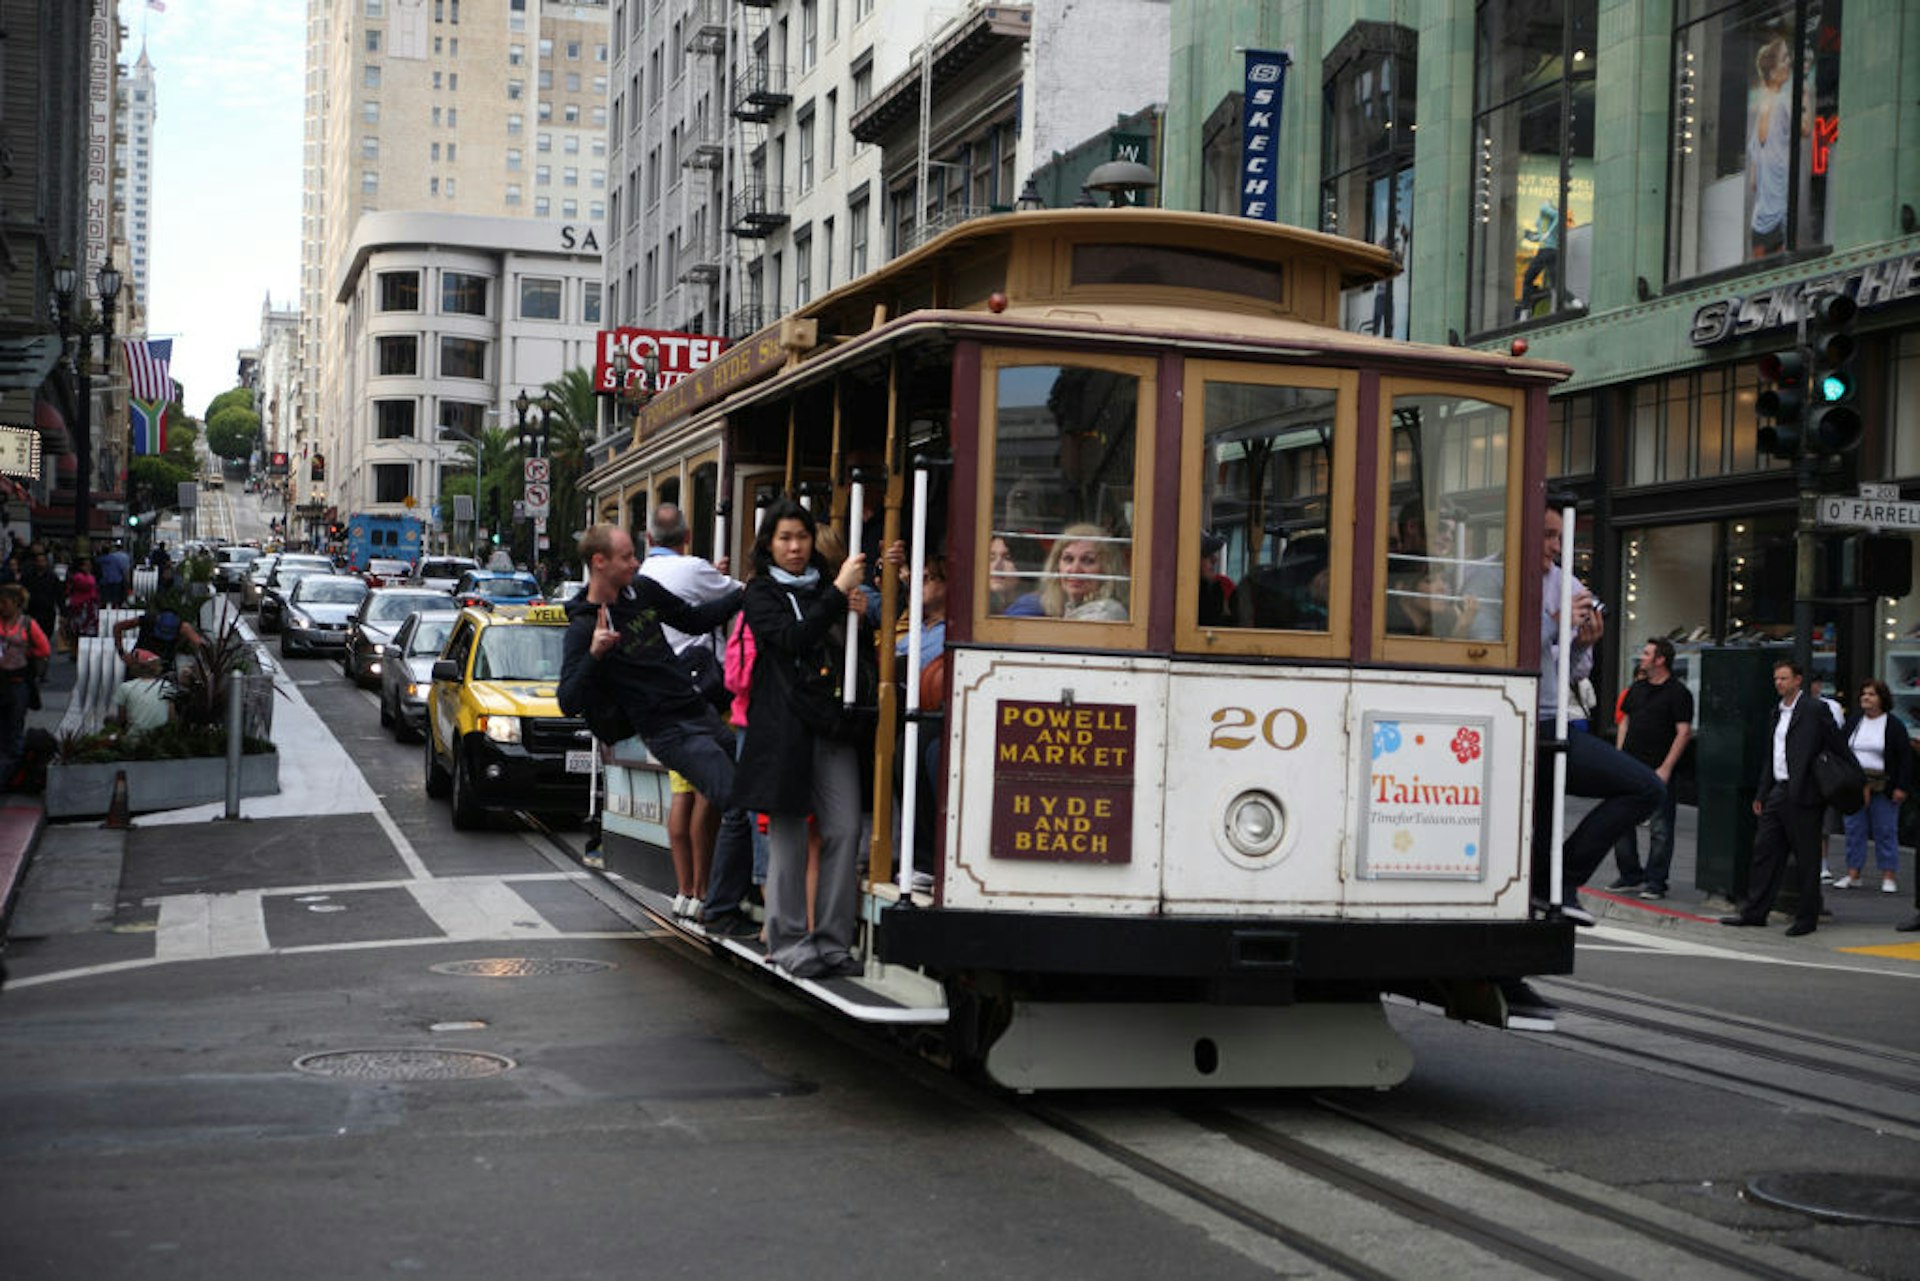 A historic cable car full of passengers makes its way up a steep street in San Francisco